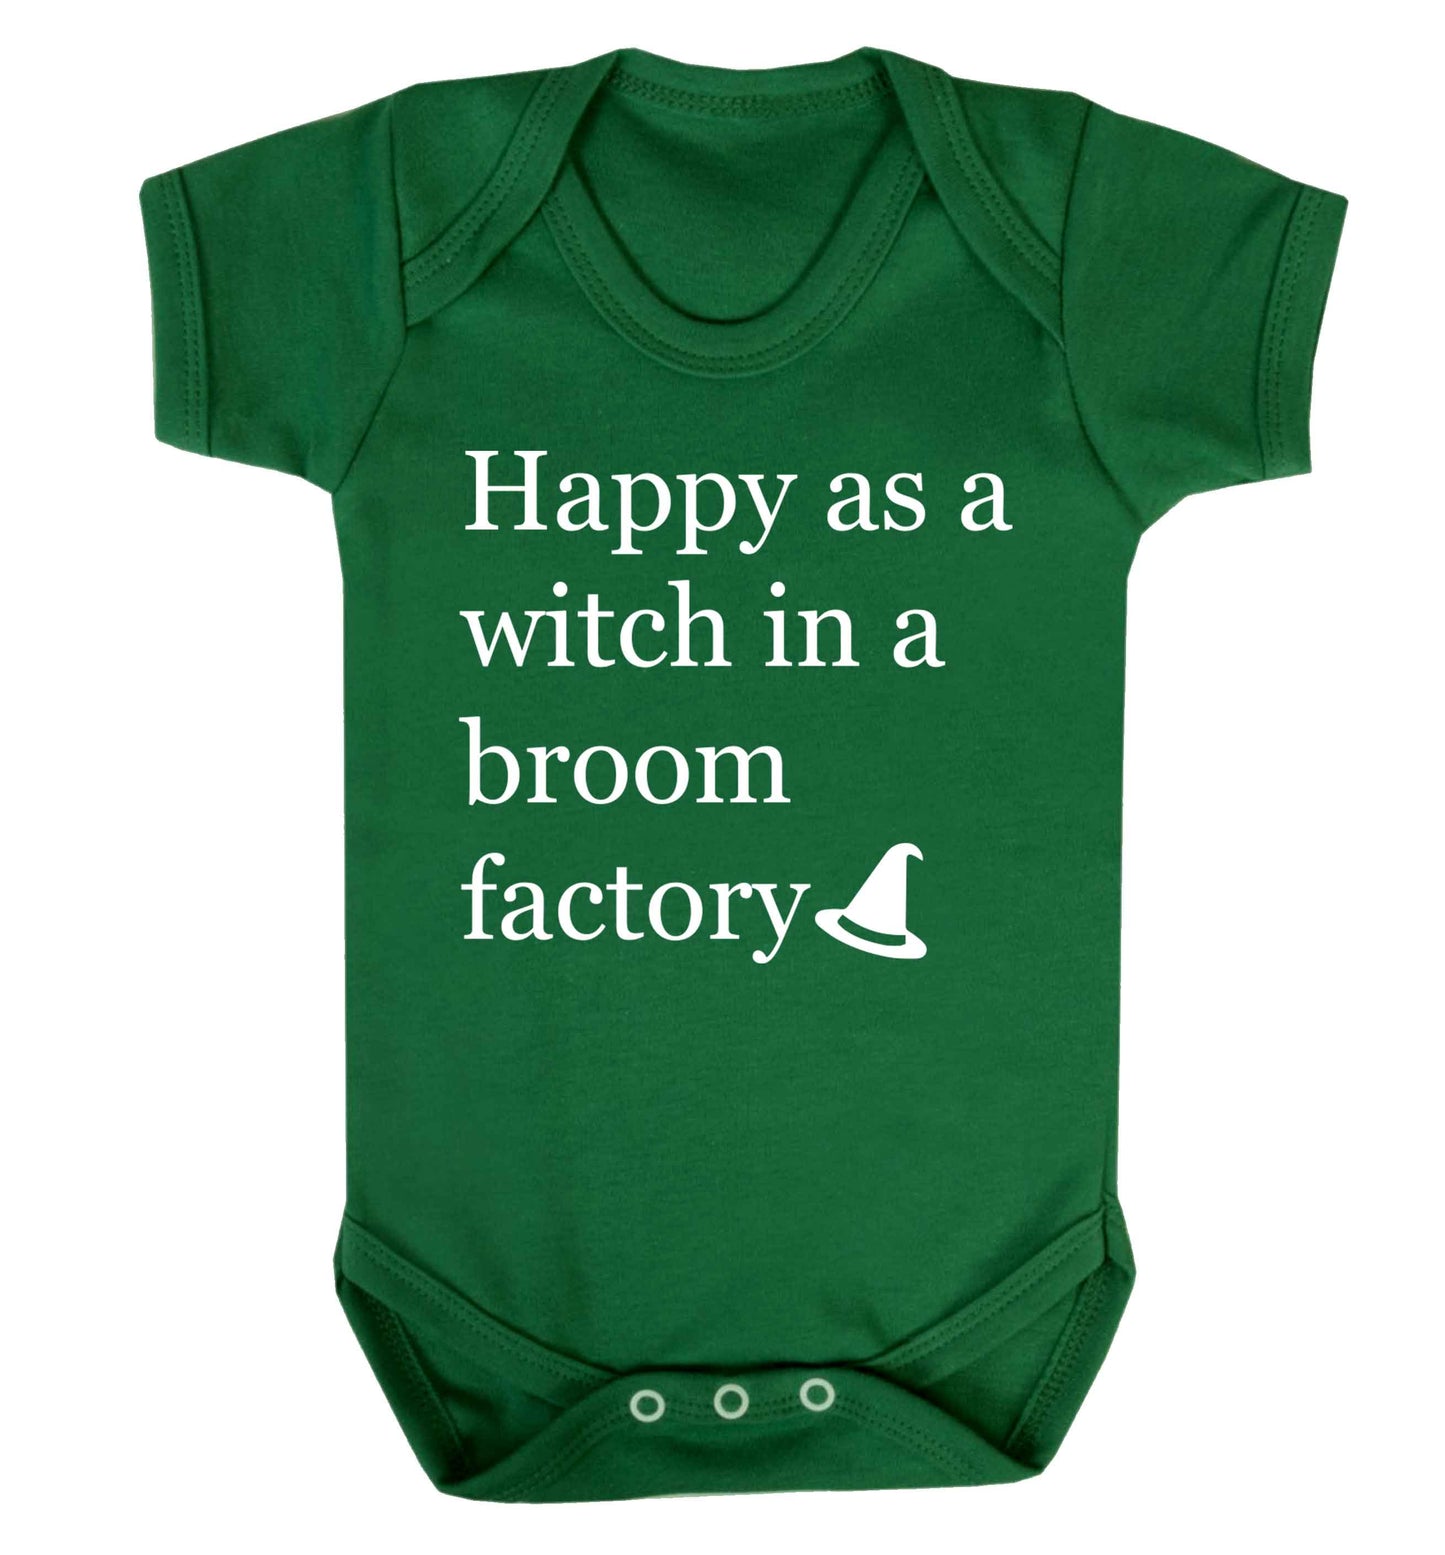 Happy as a witch in a broom factory Baby Vest green 18-24 months